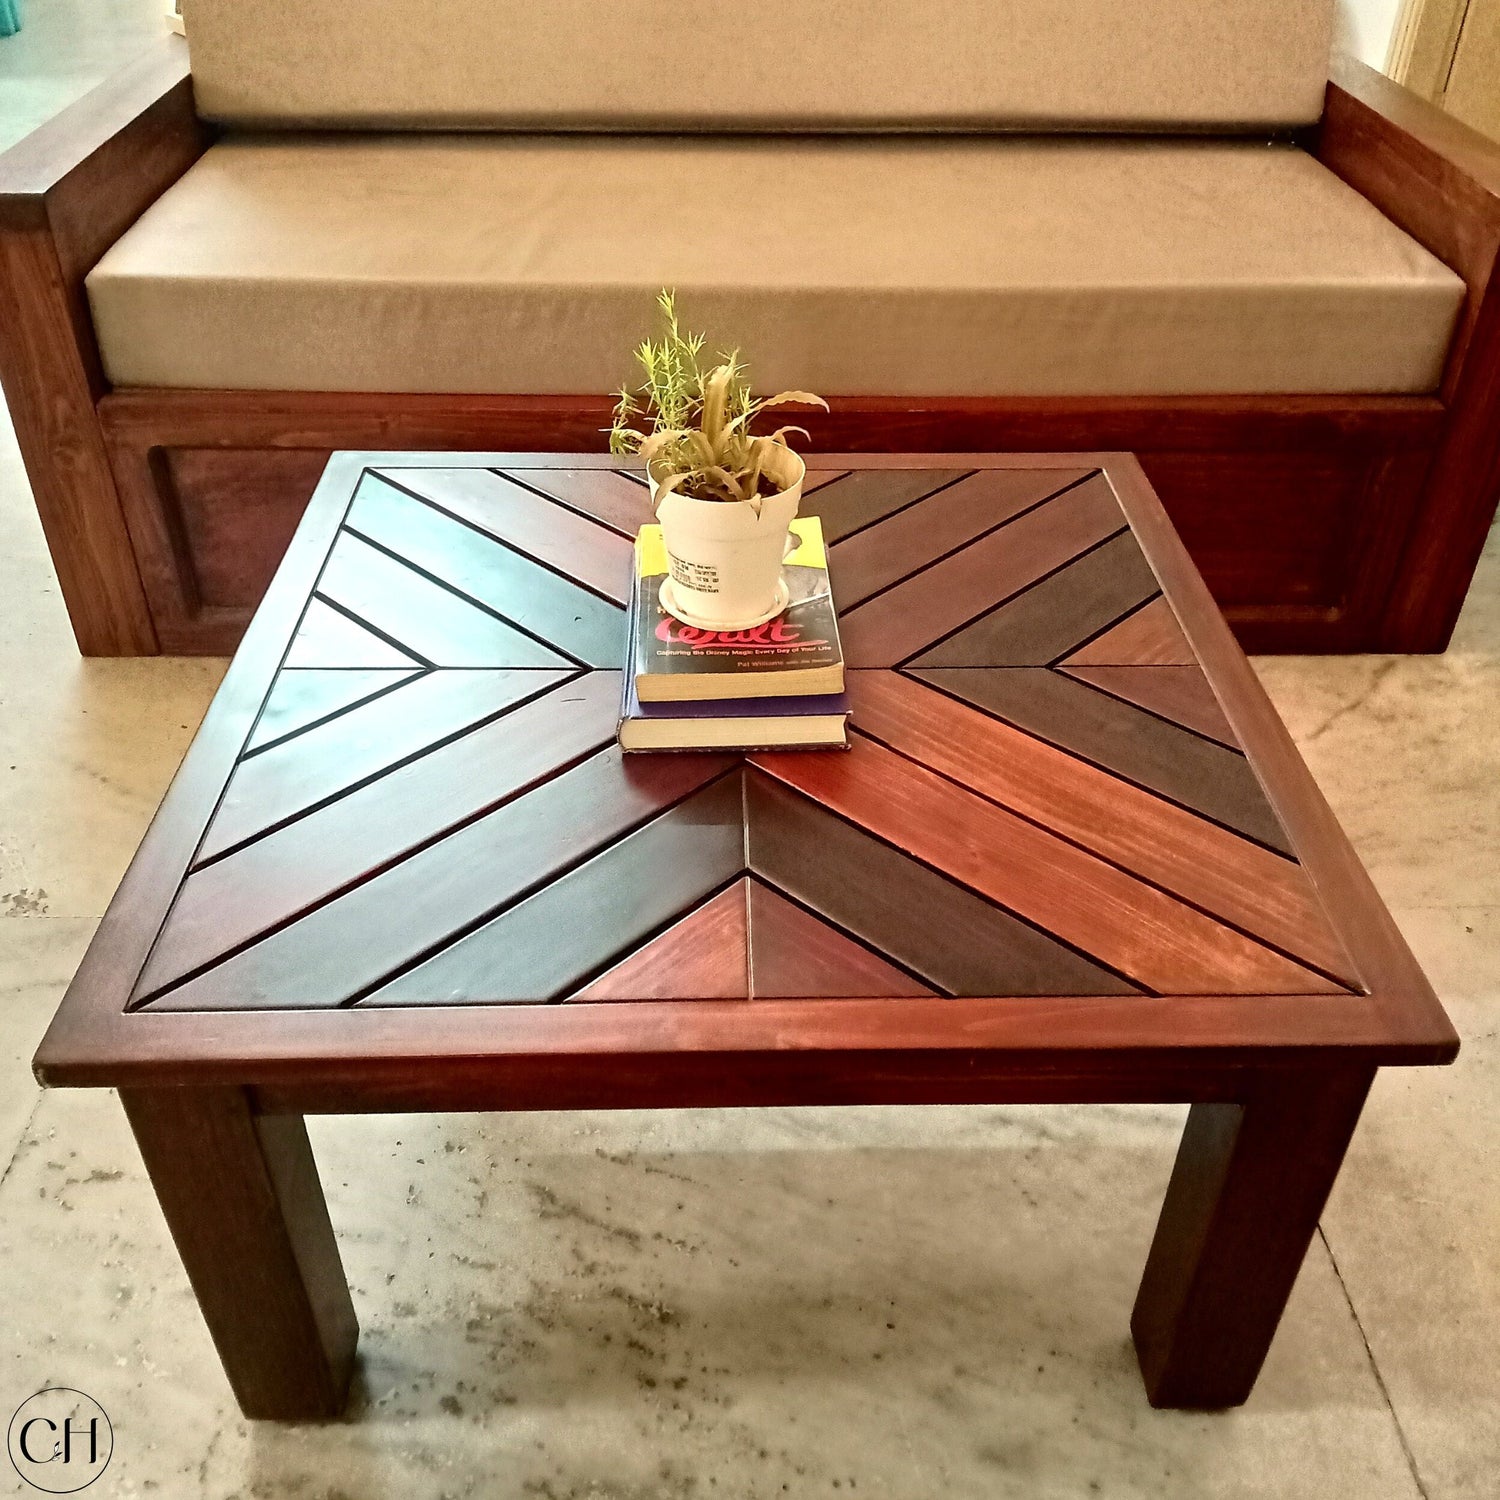 CustHum - Coffee table with herringbone tabletop, showing a small planter placed on stack of books